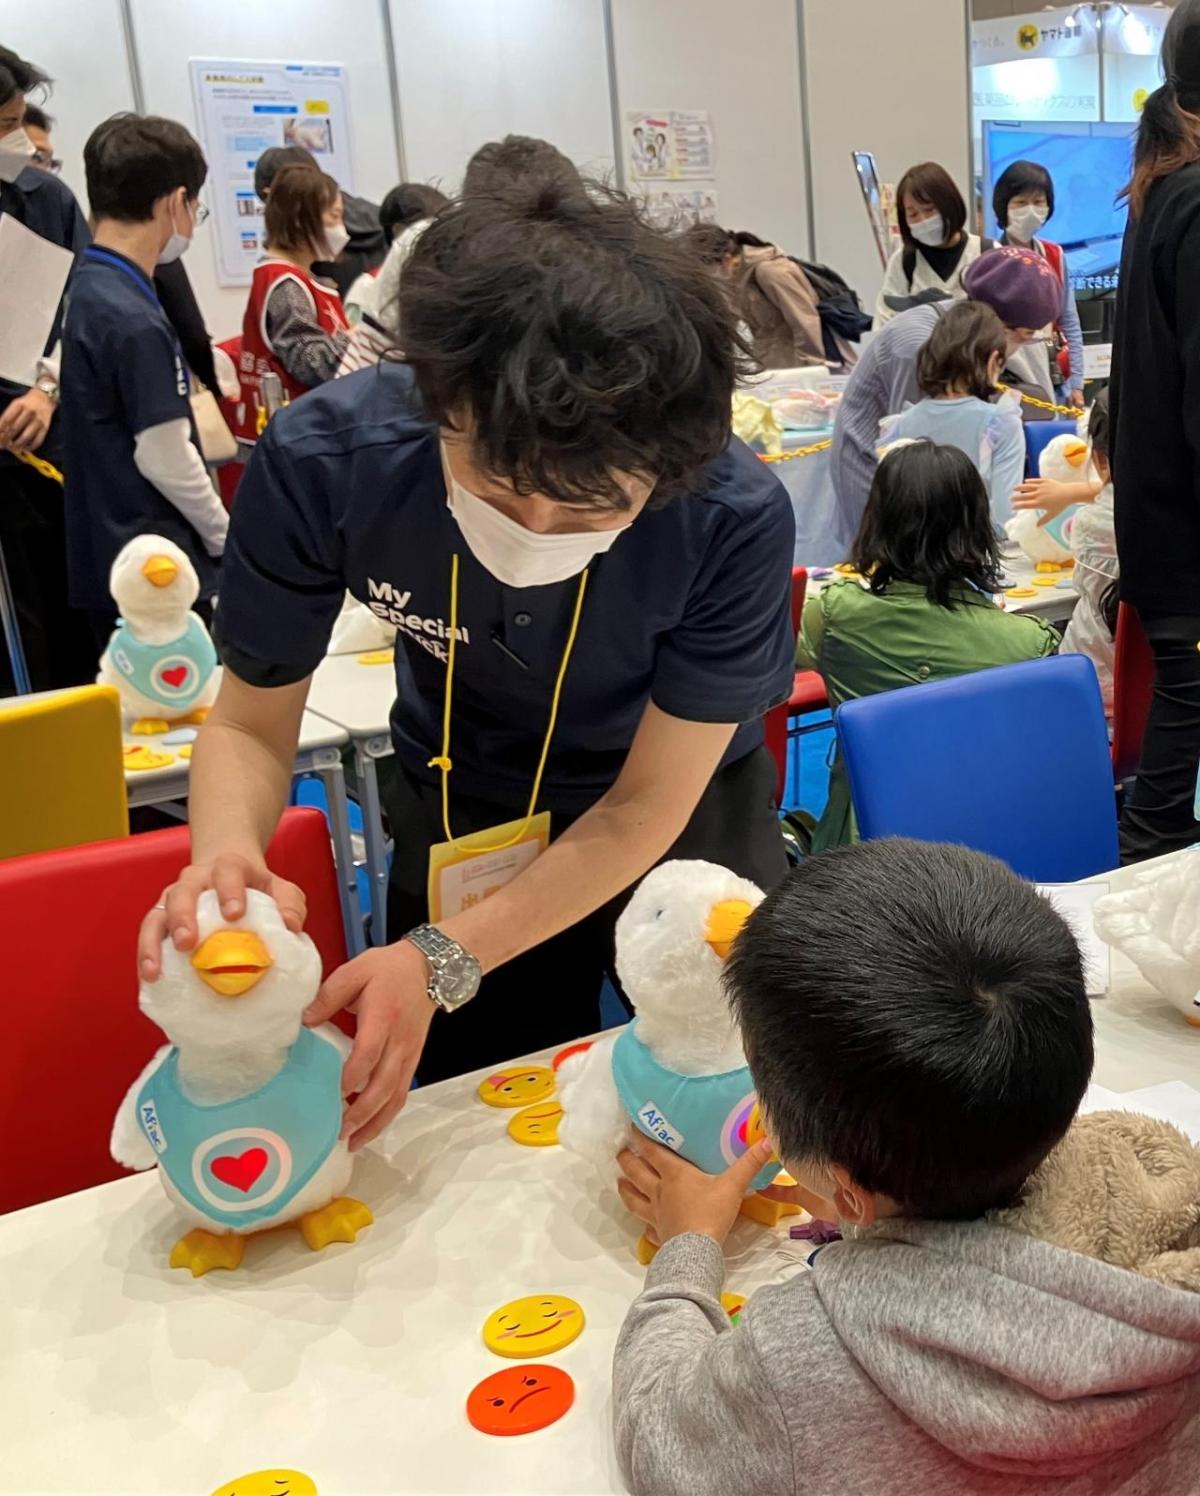 At the General Meeting of the Japan Medical Association, kids interact and play with social robot My Special Aflac Duck, which provides comfort and joy to kids with cancer and sickle cell disease.